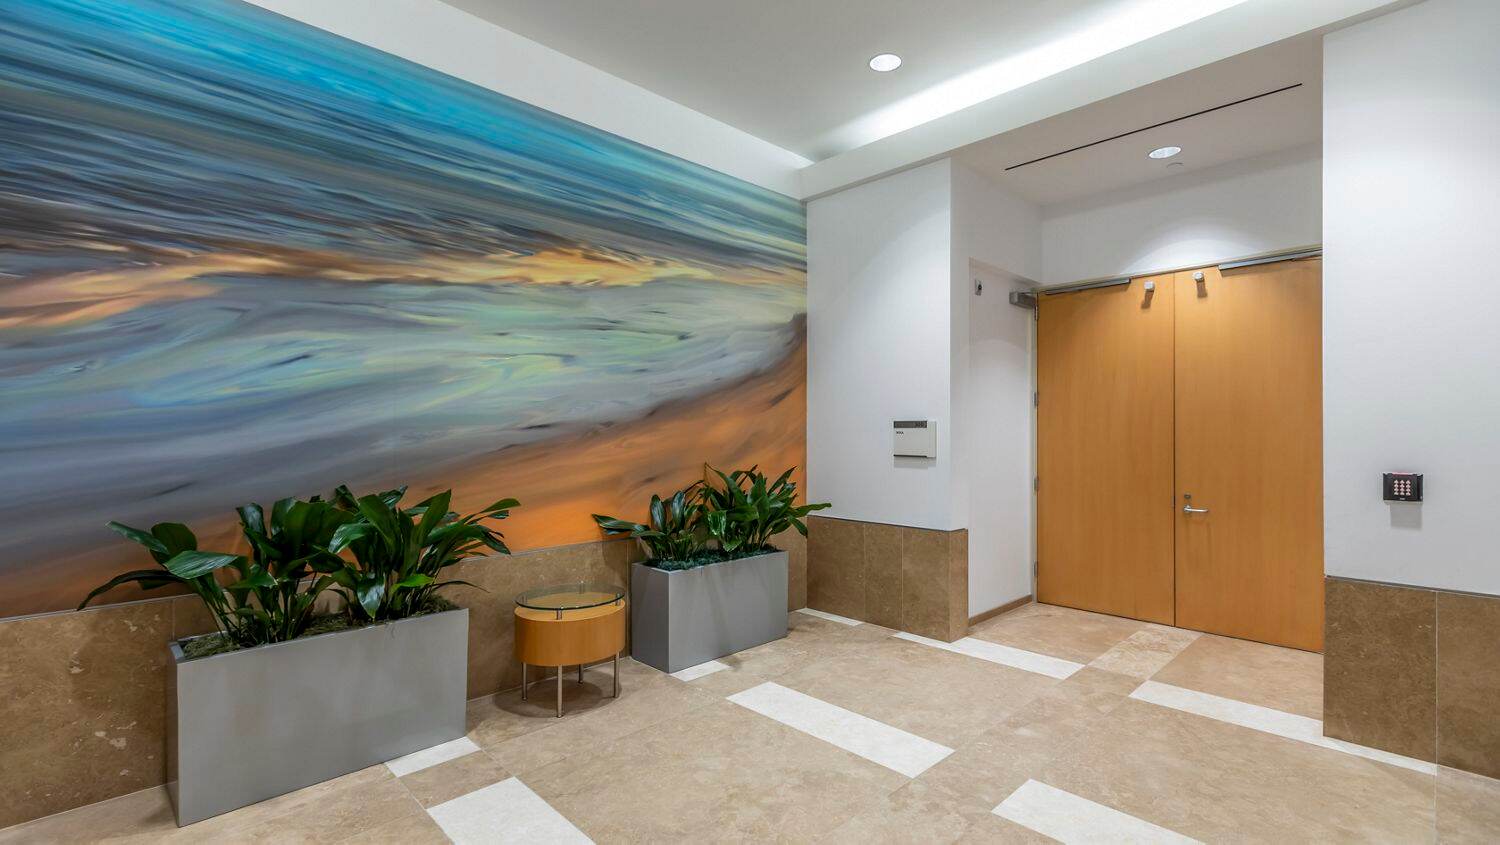 Interior photography of the lobby before reinvestment at 680 Newport Center Drive in Newport Beach, Ca